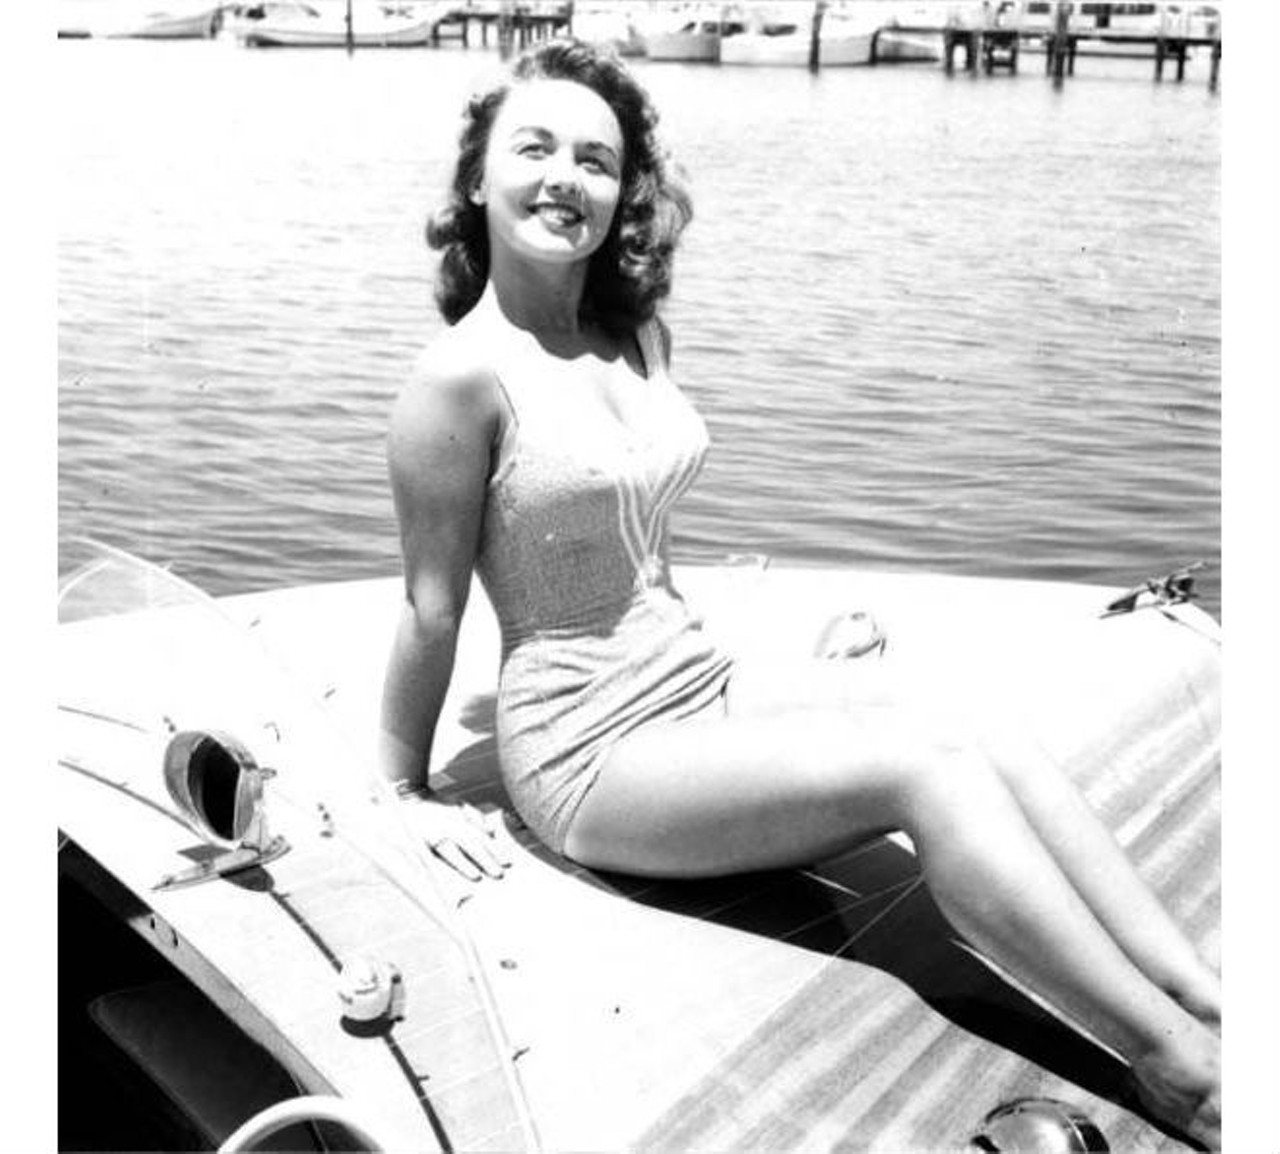 Young woman posing on a small motorboat